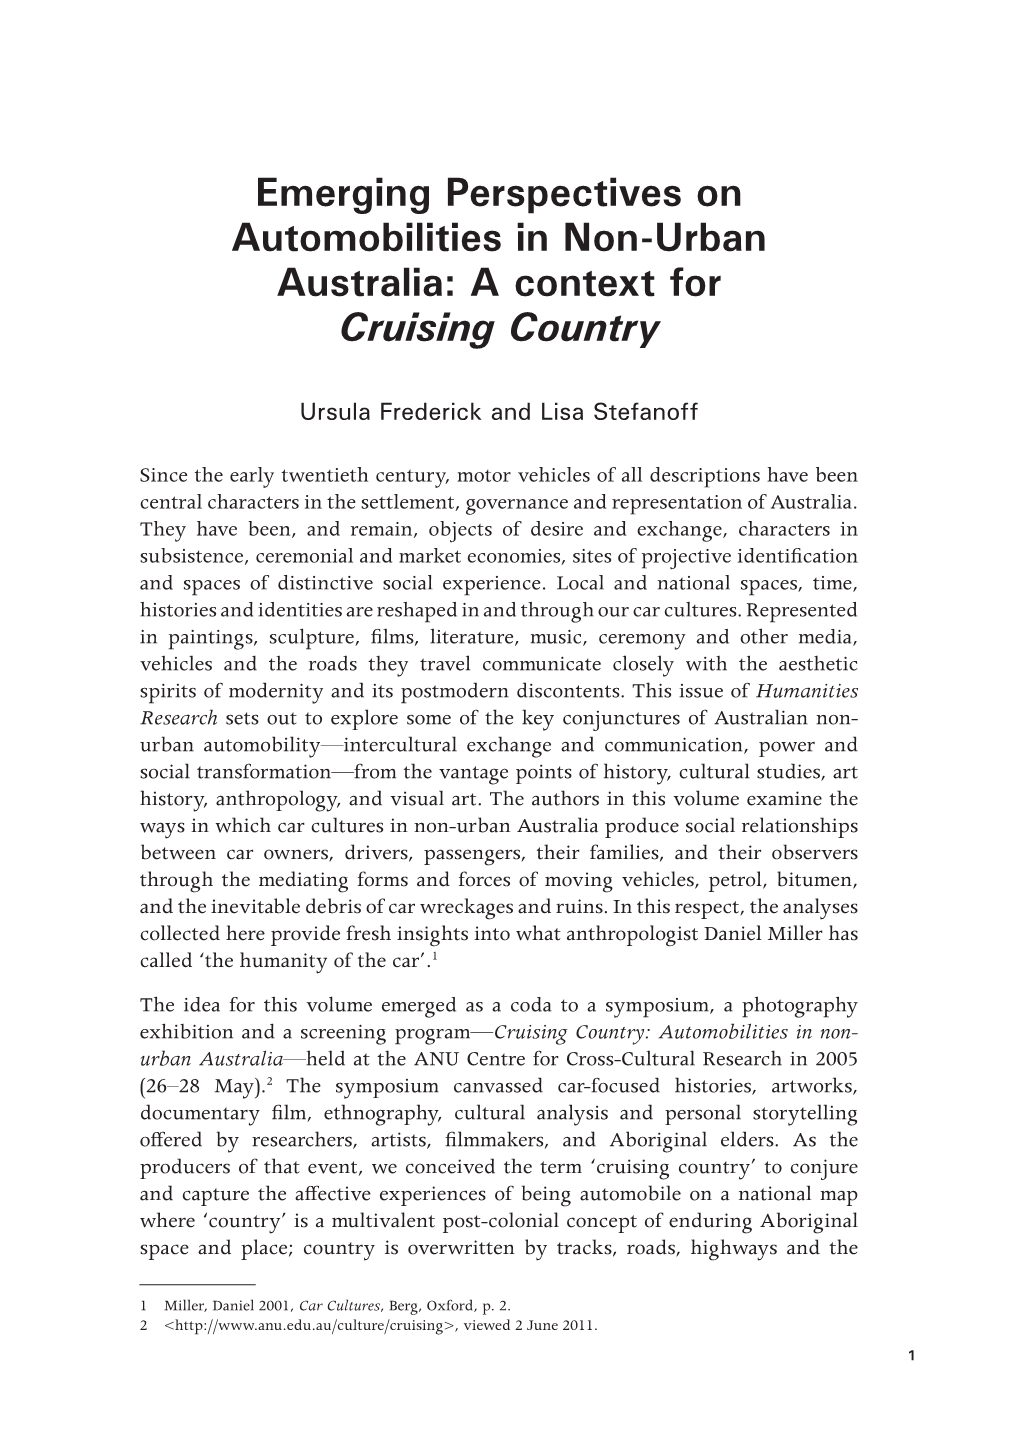 Emerging Perspectives on Automobilities in Non-Urban Australia: a Context for Cruising Country